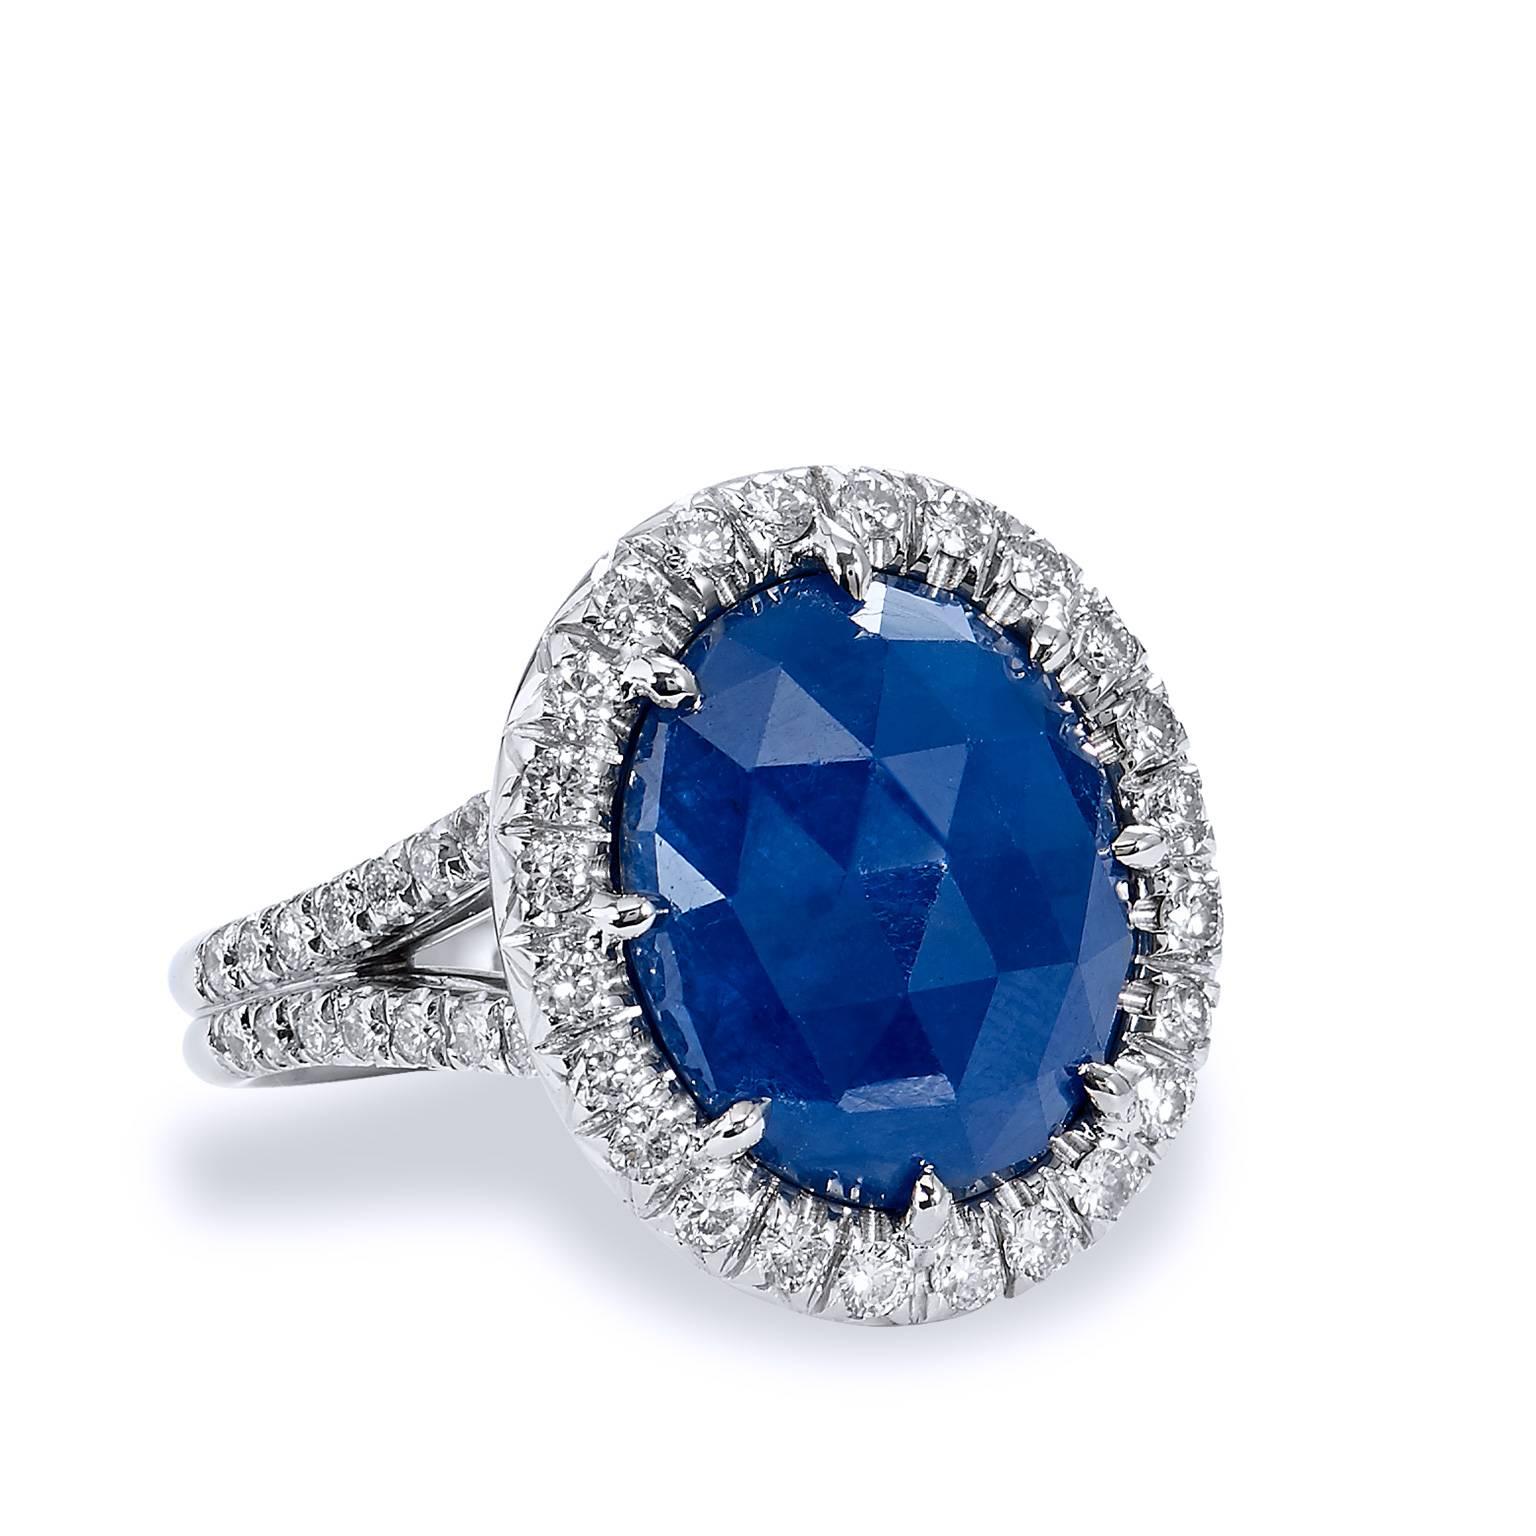 5.59 Carat No Heat Blue Sapphire and Diamond 18 karat Gold Ring Size 6.25

This is handcrafted by H&H Jewels, in 18 kt white gold, this stunning cocktail ring features an impressive 5.59 carat no heat rose cut blue sapphire. 
The sapphire is